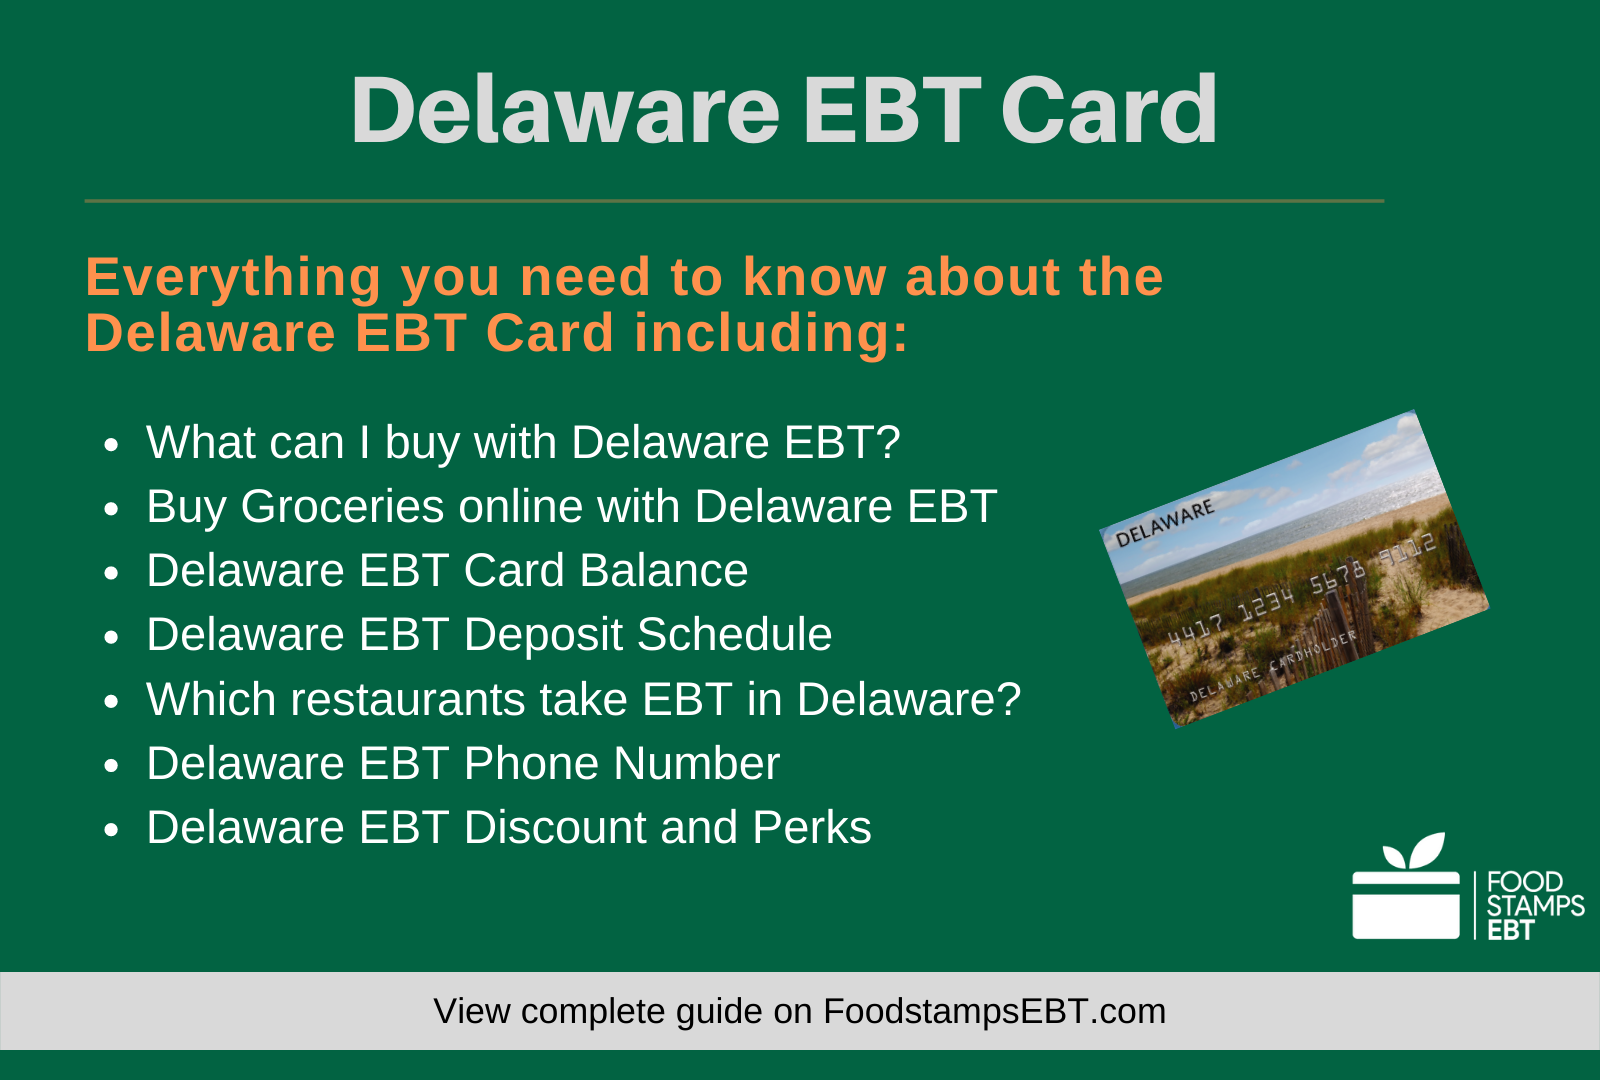 "Delaware EBT Card Questions and Answers"